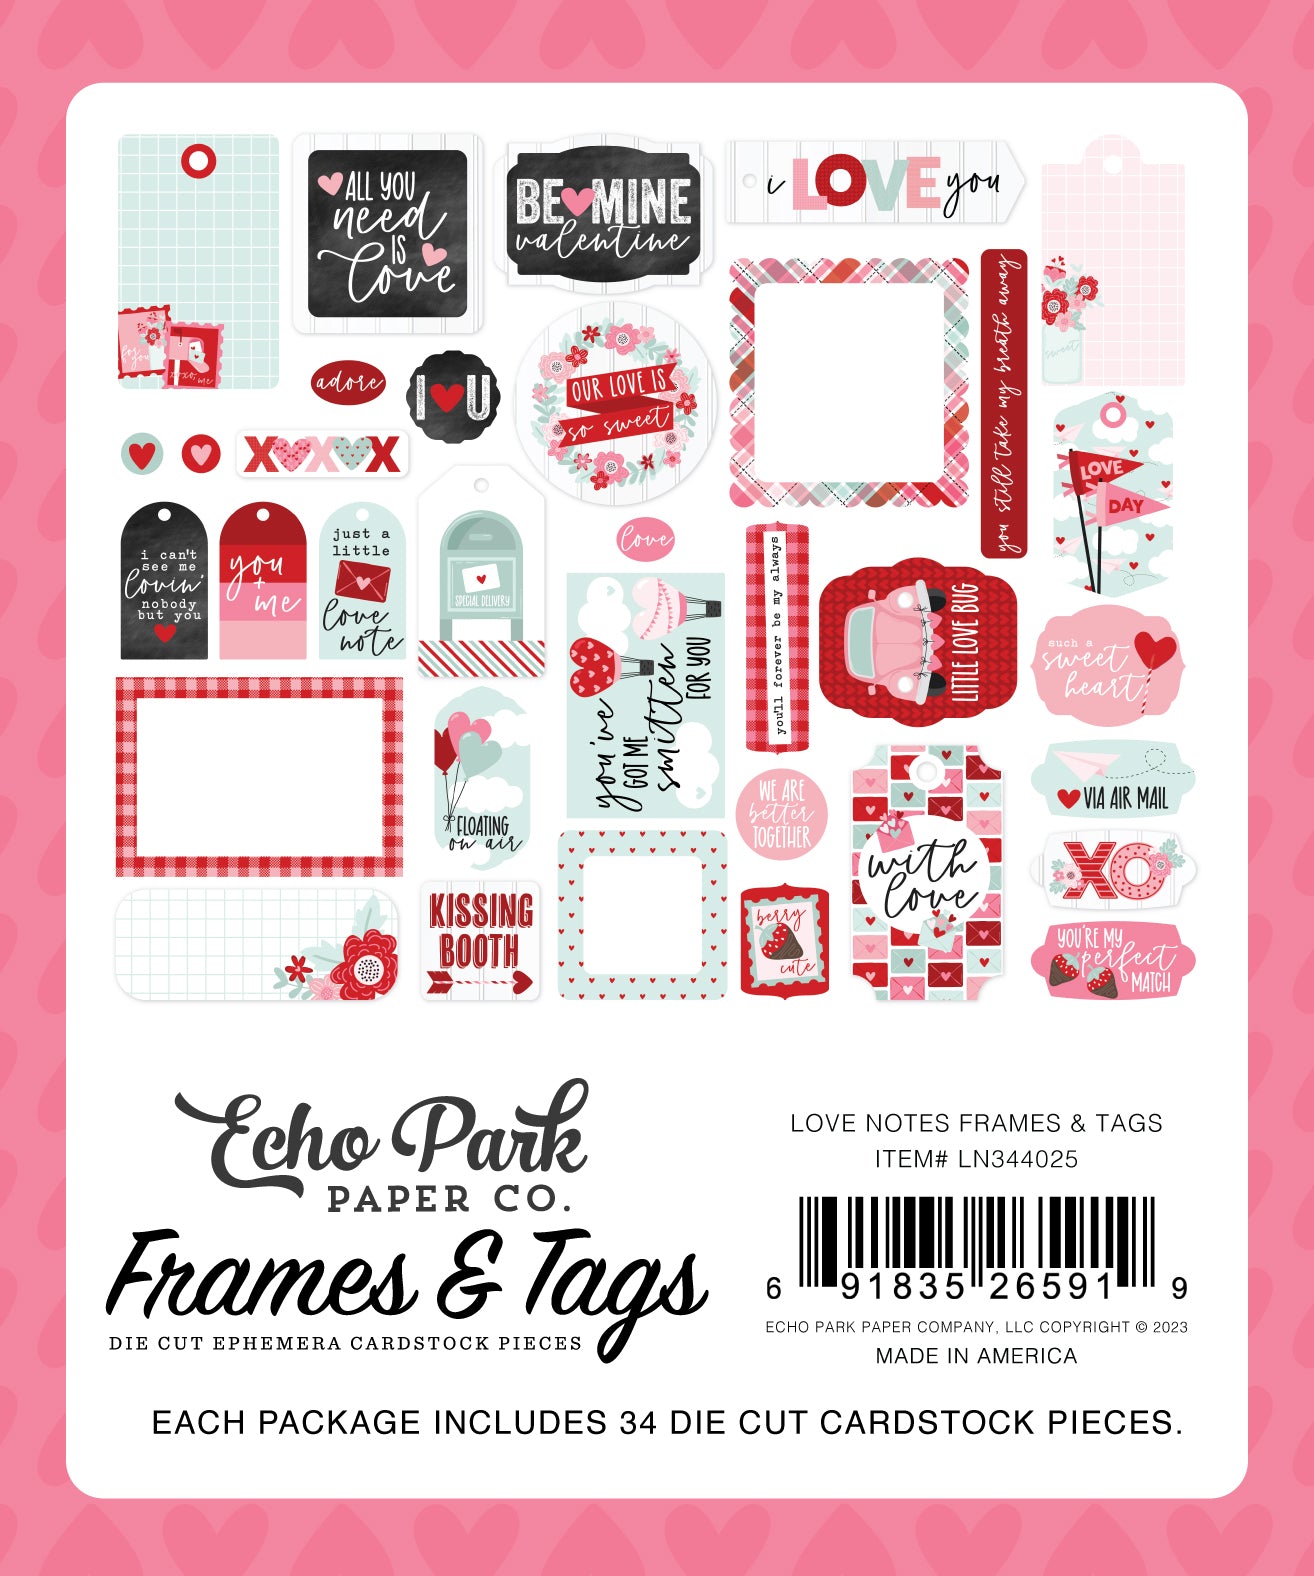 Love Notes Collection Scrapbook Frames & Tags by Echo Park Paper